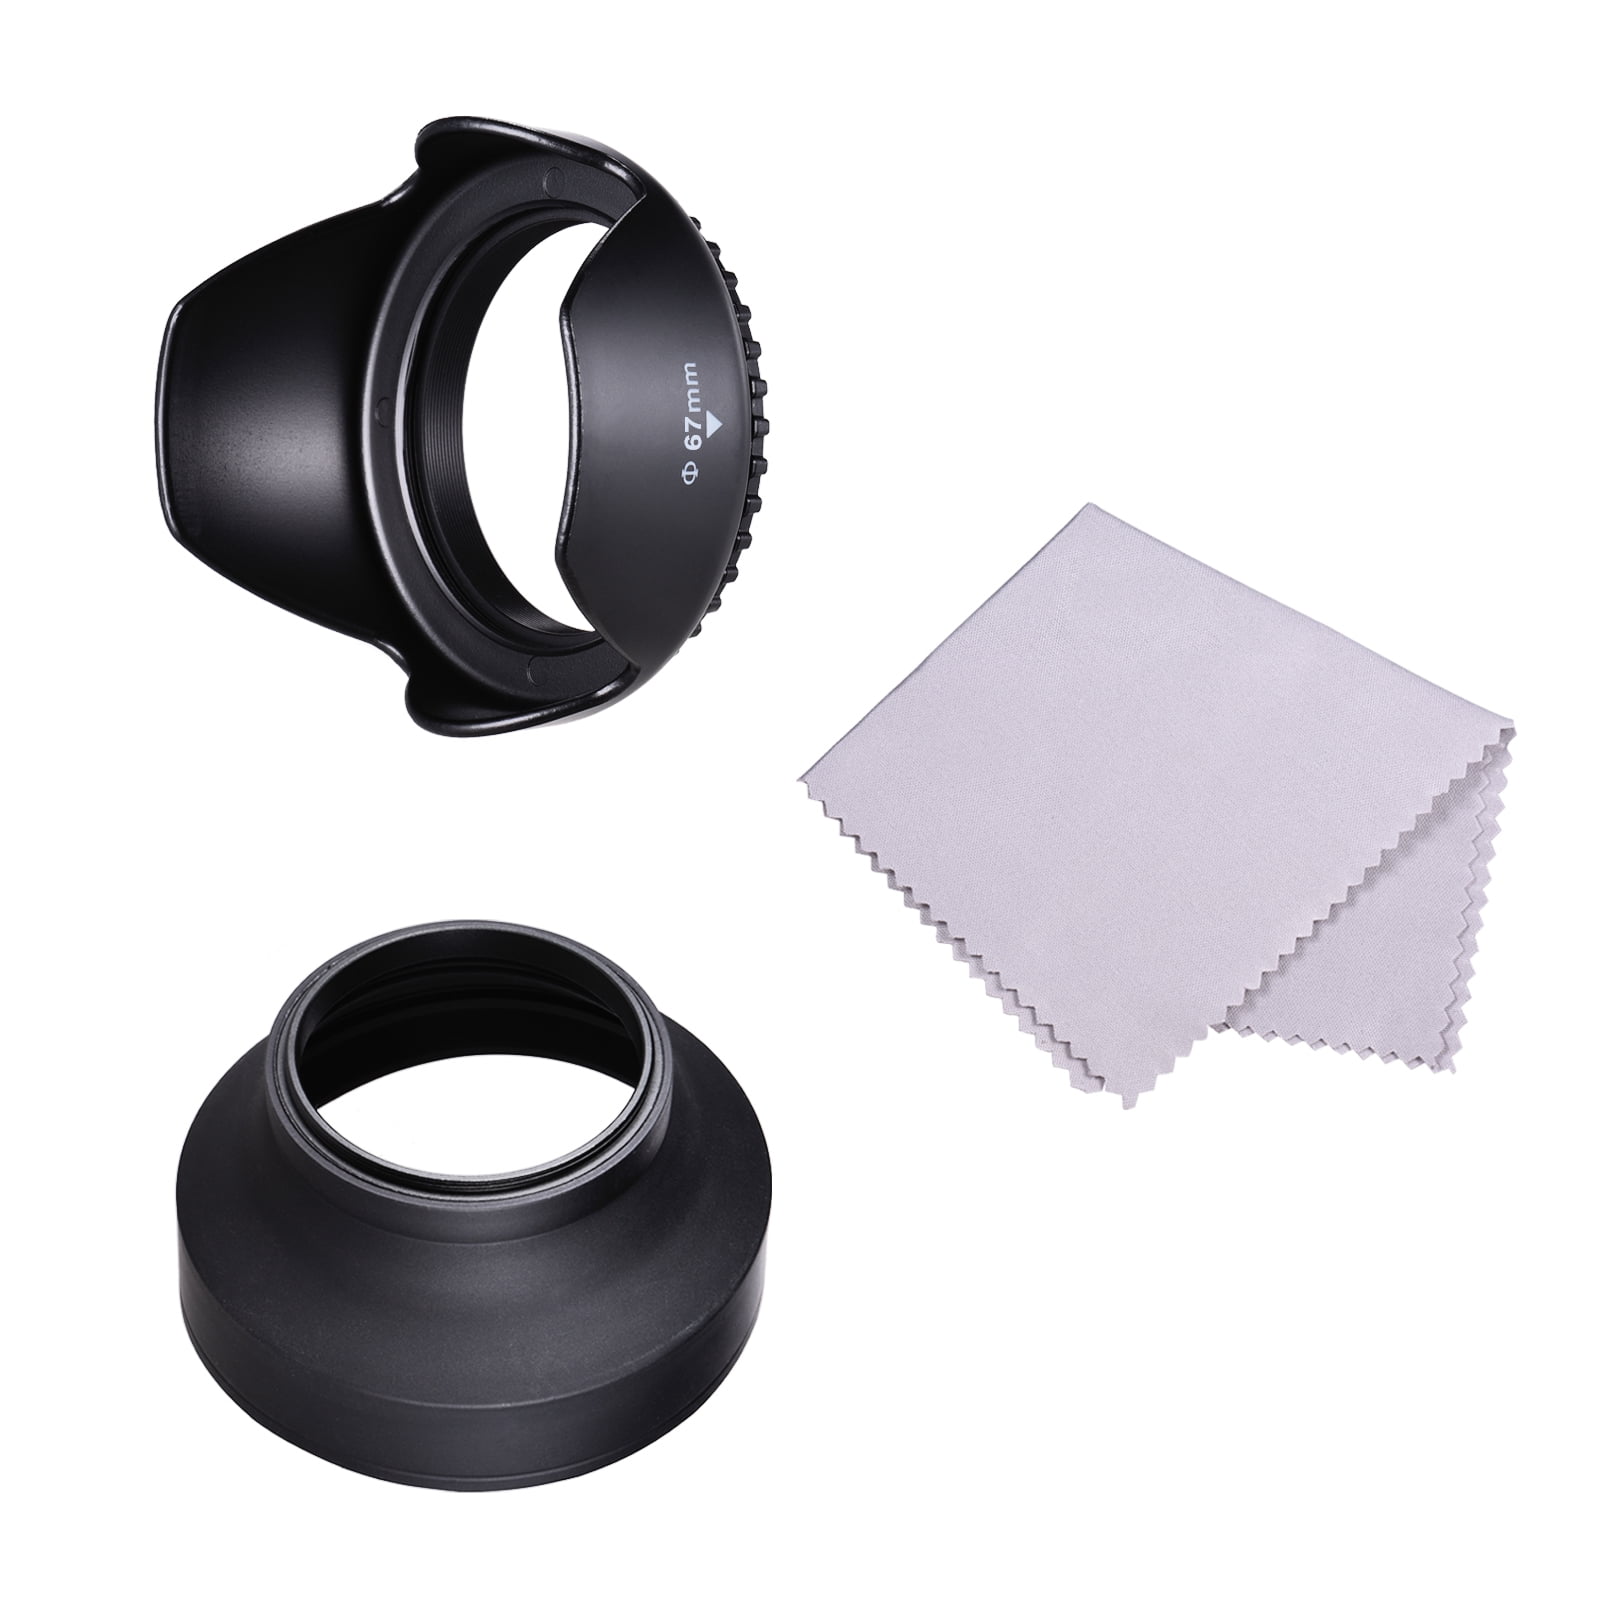 Gadget Place Professional 3-Stage Collapsible Universal Rubber Multi-Lens Hood for Nikon 1 Nikkor VR 10-100mm f/4.5-5.6